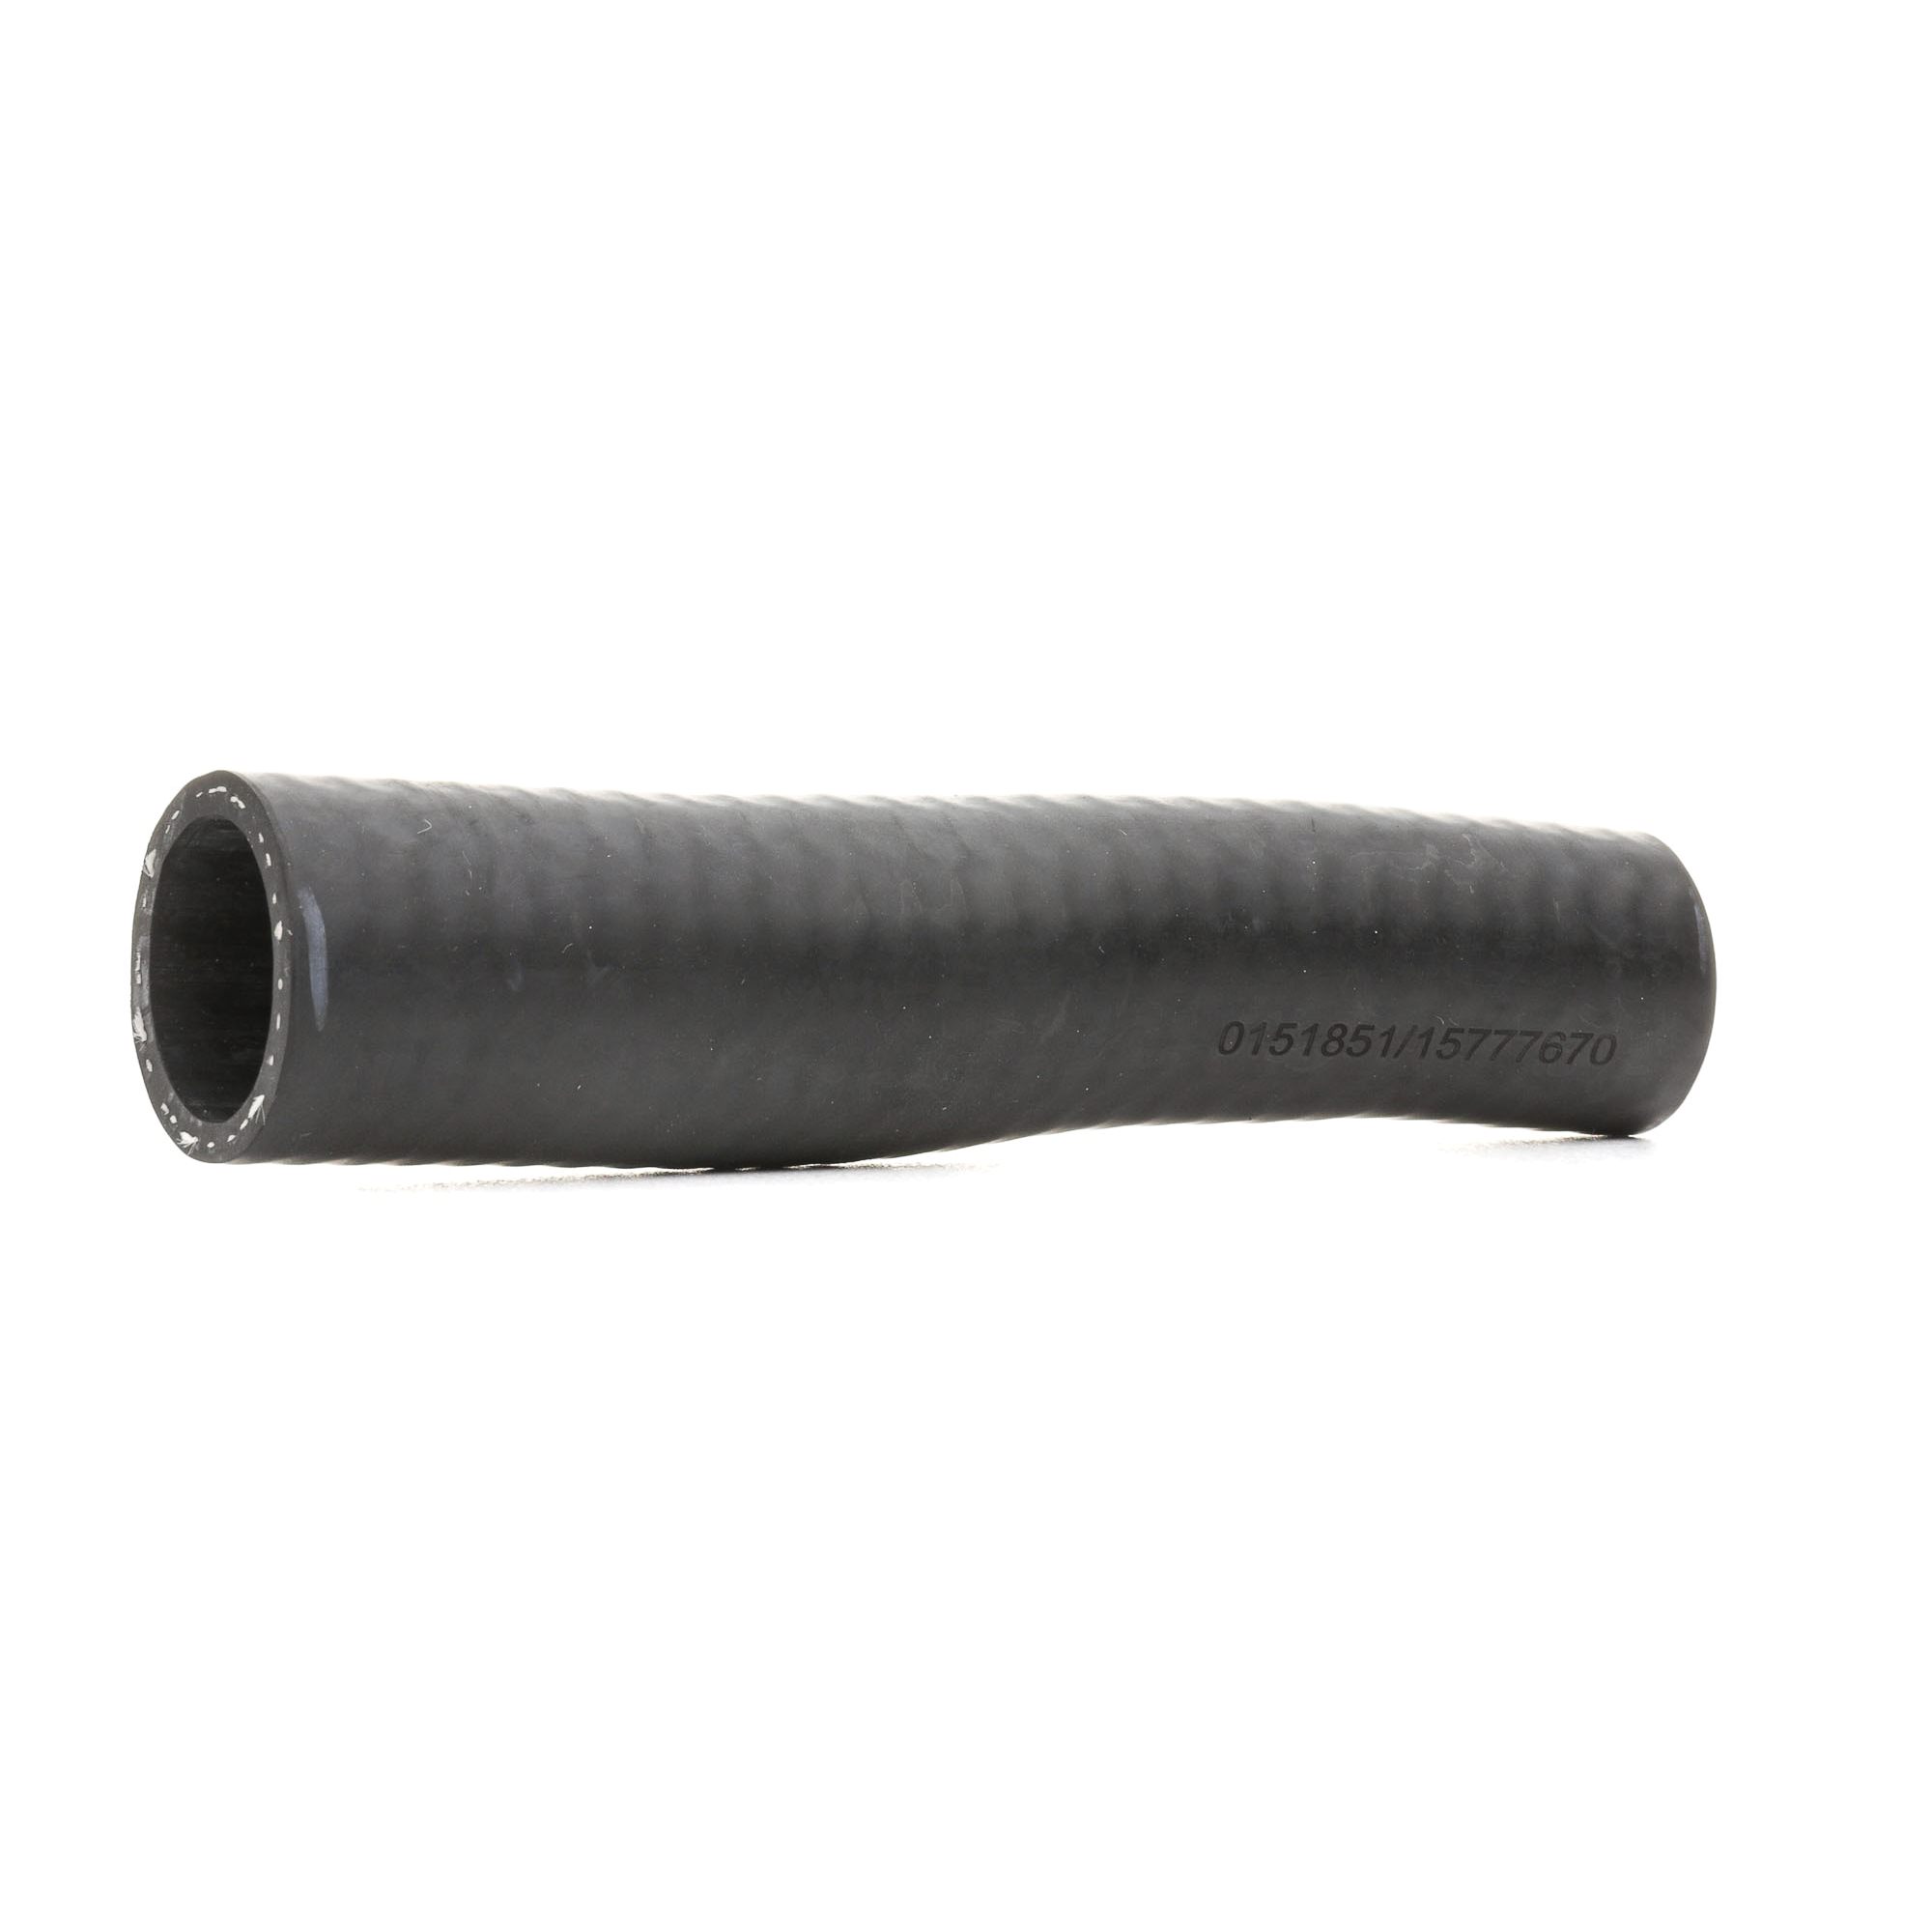 STARK SKRH-17880024 Radiator Hose Rubber with fabric lining, without clamps